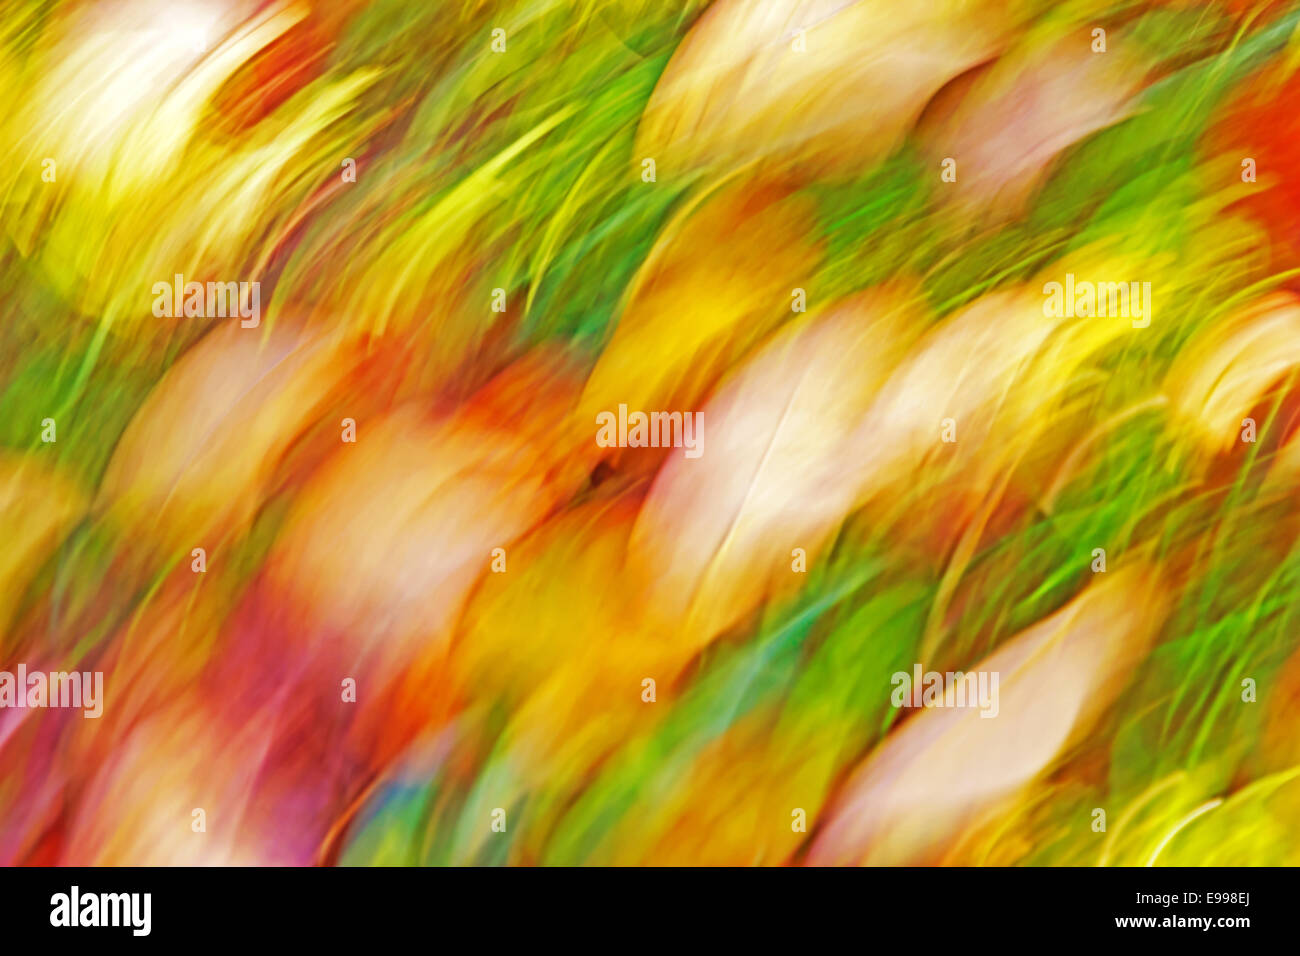 Motion blurred abstract background, pastel couleurs d'automne. Banque D'Images